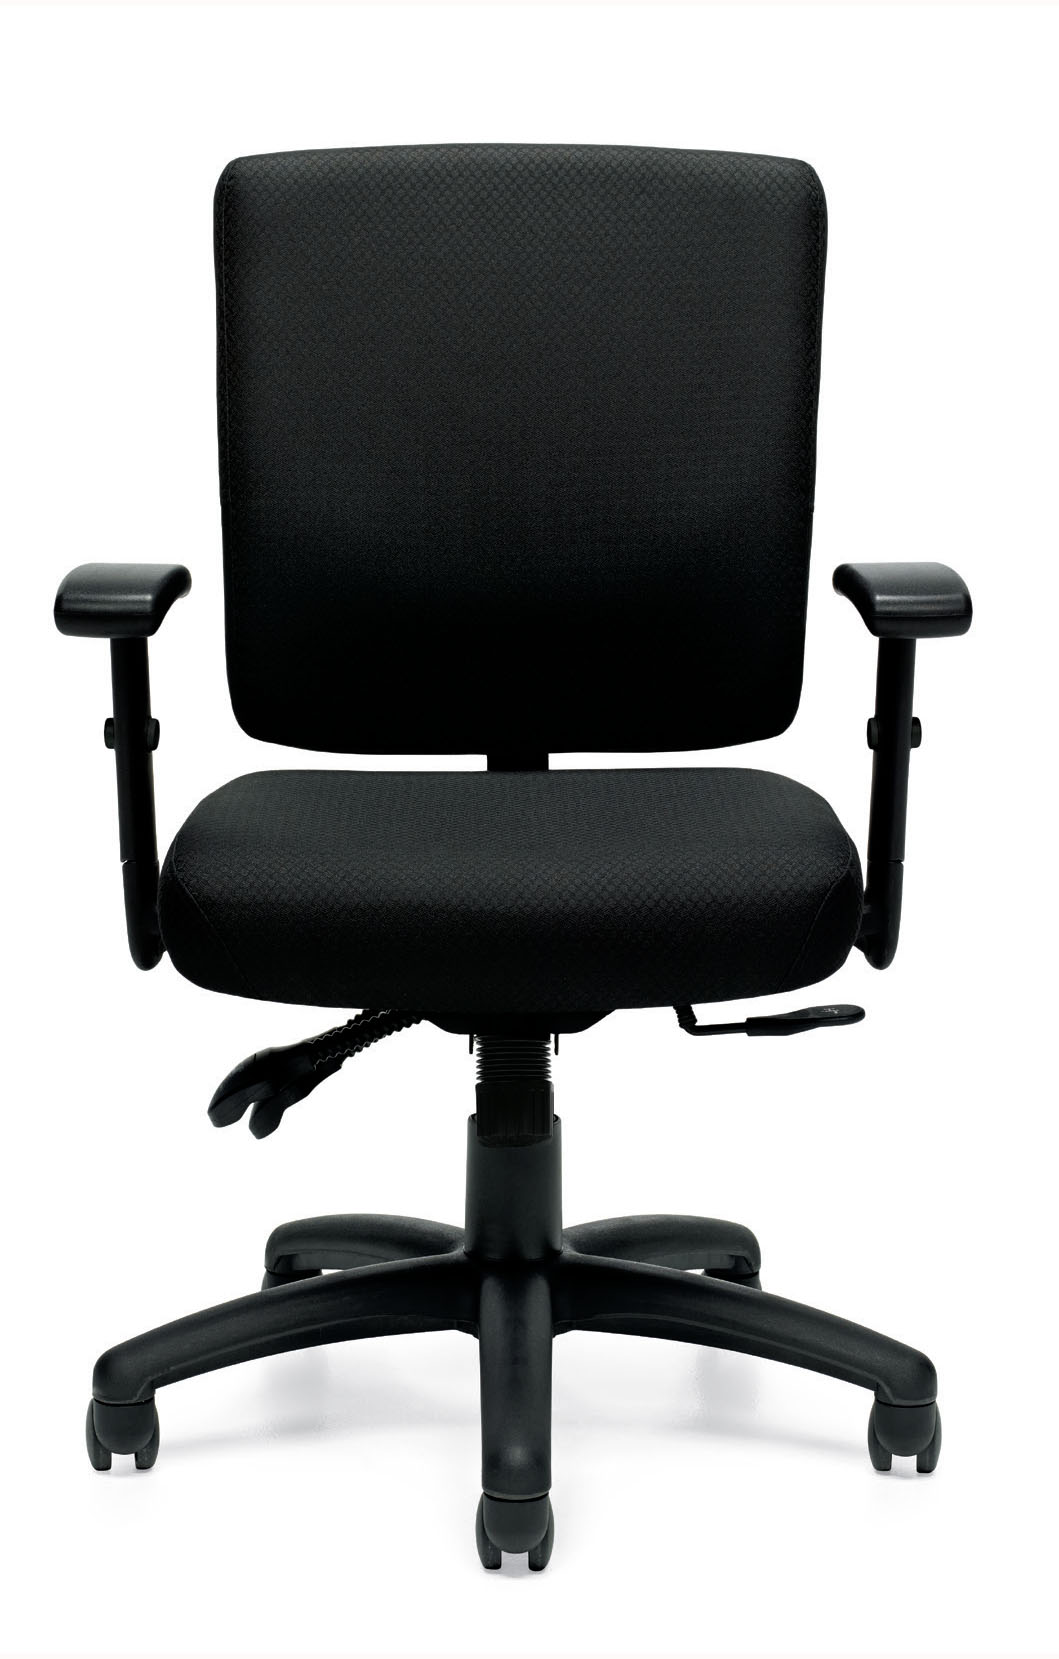 Offices To Go™ Multi-Function Chair with Arms, OTG11950B